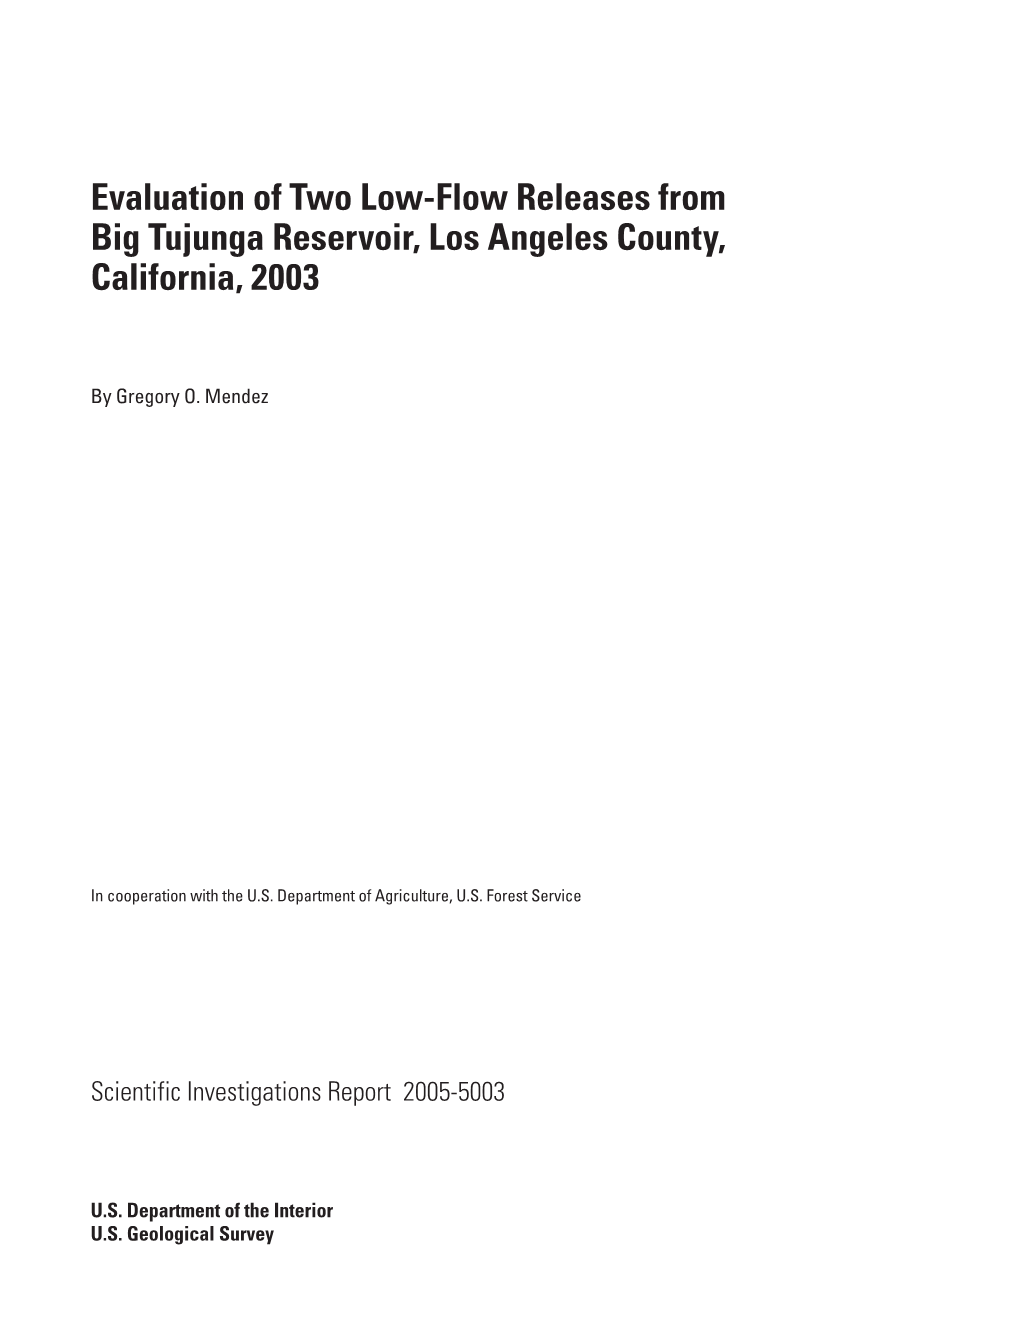 Evaluation of Two Low-Flow Releases from Big Tujunga Reservoir, Los Angeles County, California, 2003